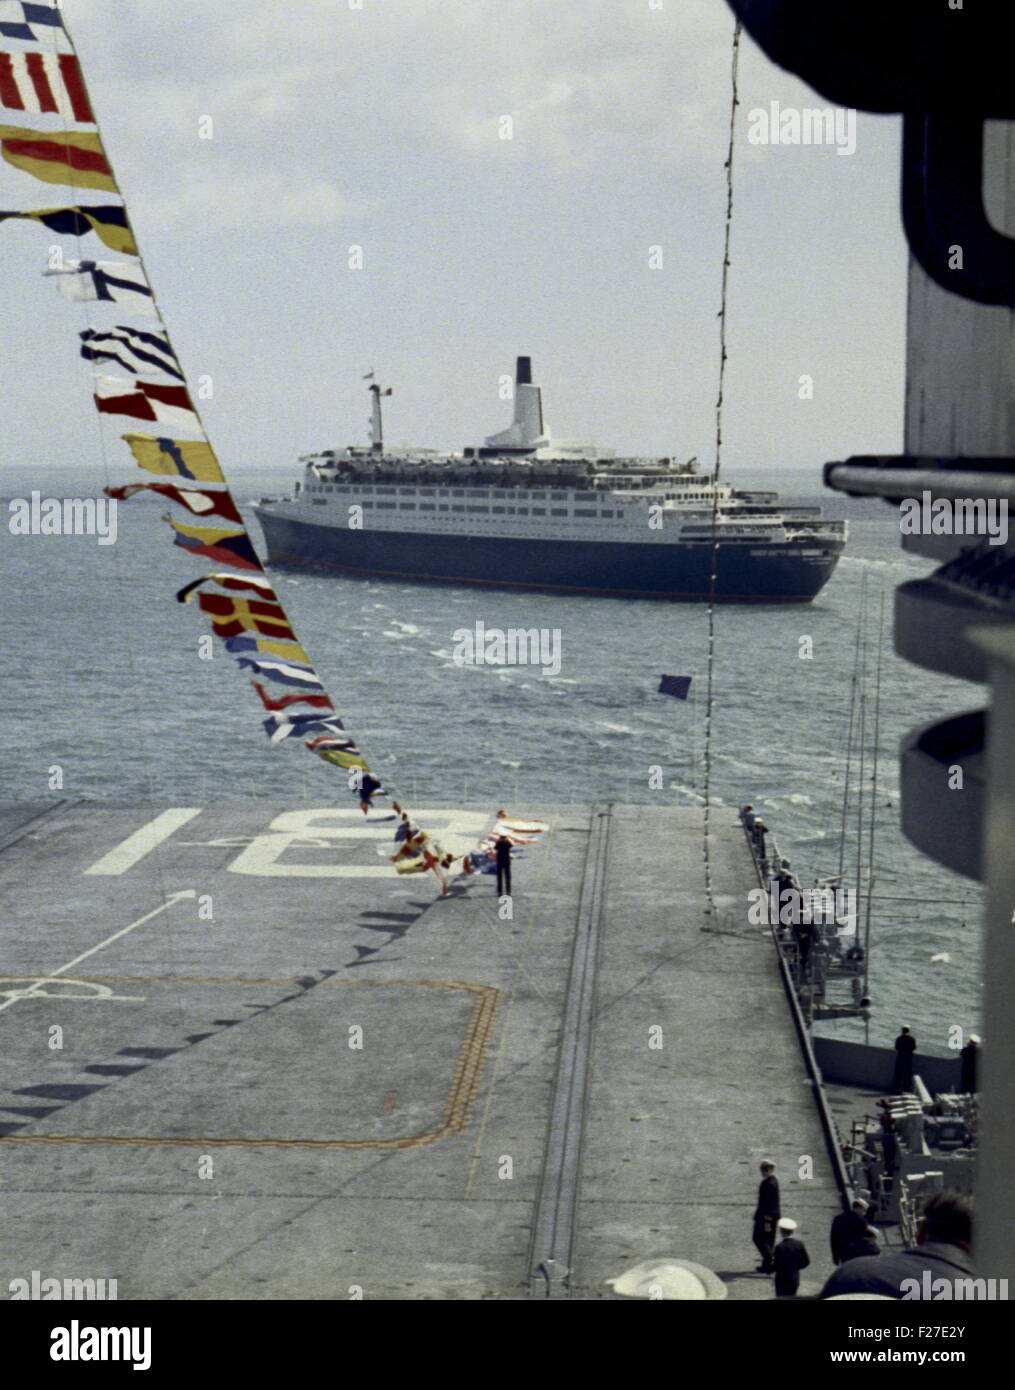 AJAXNETPHOTO - 16TH MAY 1969. SPITHEAD, ENGLAND.  - CUNARD'S PASSENGER LINER QE2 STEALS THE SHOW - PICTURED OFF SPITHEAD FROM THE DECK OF THE USS WASP, DURING THE ROYAL REVIEW OF 61 WARSHIPS OF TWELVE N.A.T.O. (NORTH ATLANTIC TREATY ORGANISATION) COUNTRIES BY H.M. QUEEN ELIZABETH II EMBARKED ON THE ROYAL YACHT BRITANNIA.  PHOTO:JONATHAN EASTLAND/AJAX REF:NATO REV 69 Stock Photo